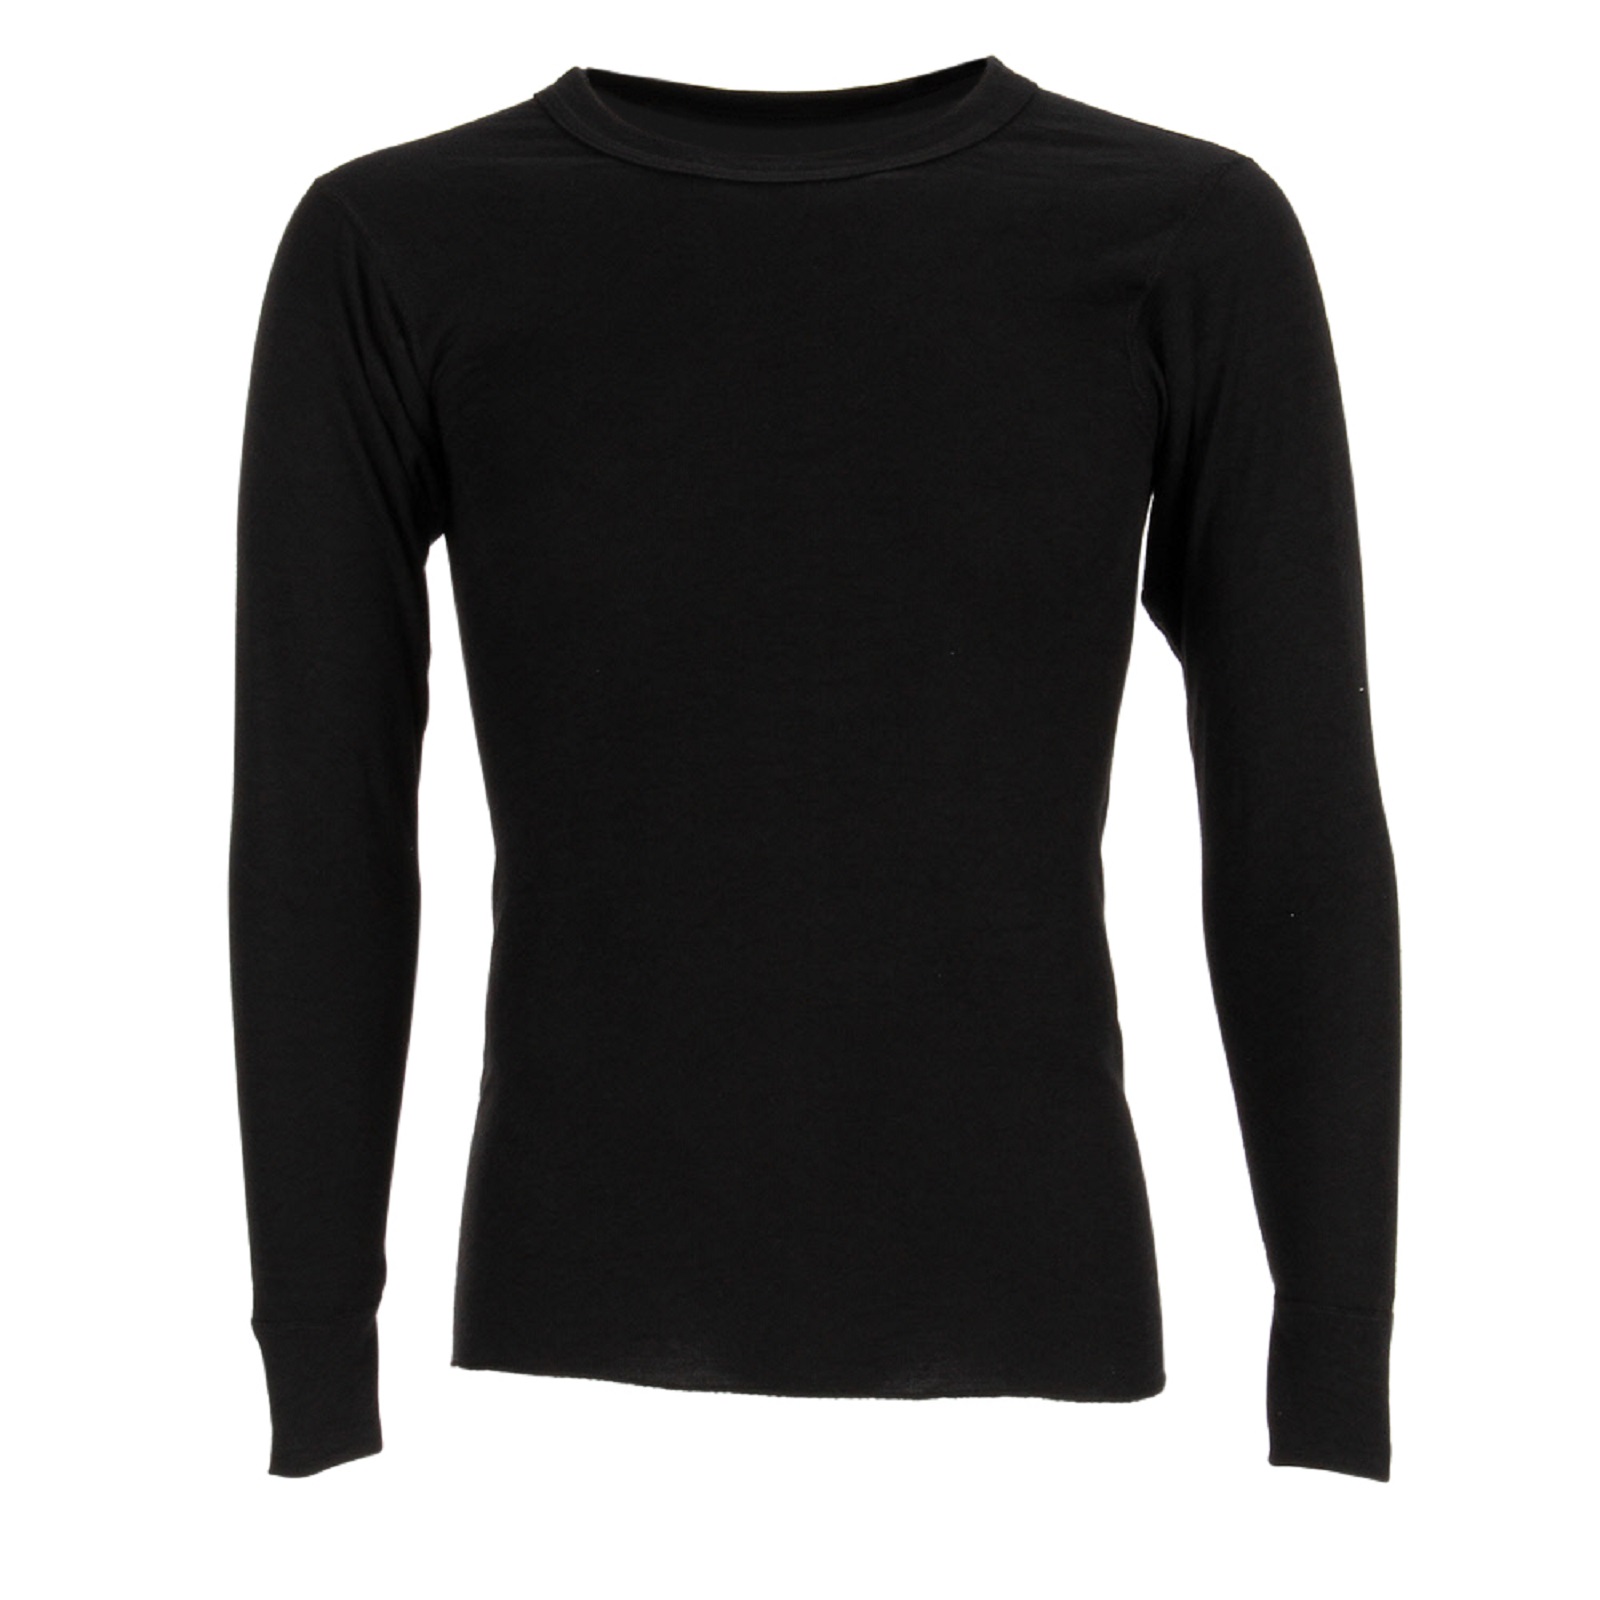 Rock Face Men's Big & Tall Thermal base layer undershirt - Online Exclusive